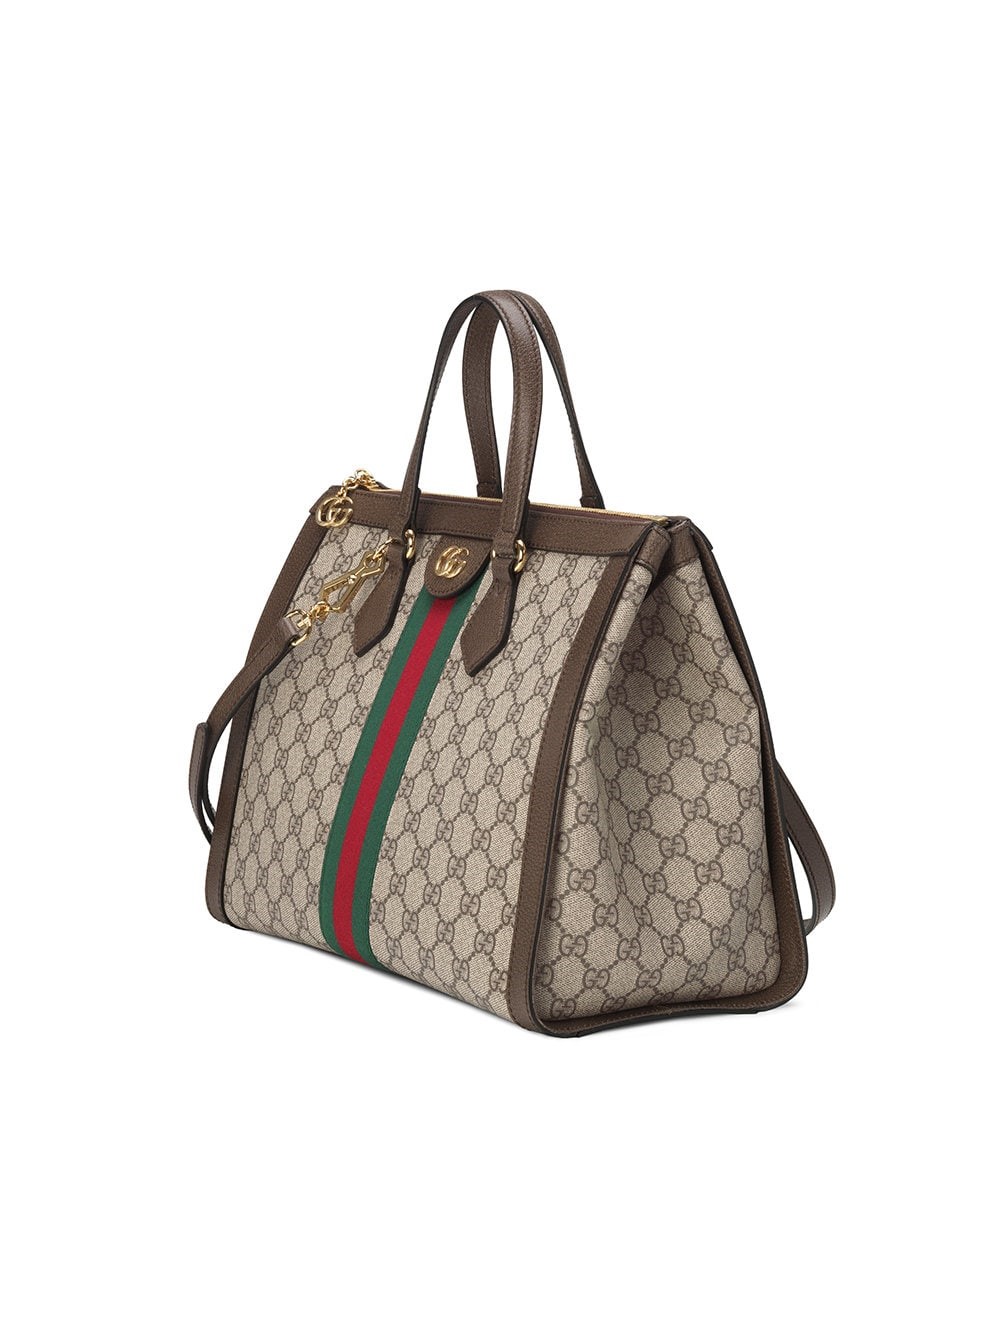 gucci MEDIUM OPHIDIA BAG available on www.waterandnature.org - 25088